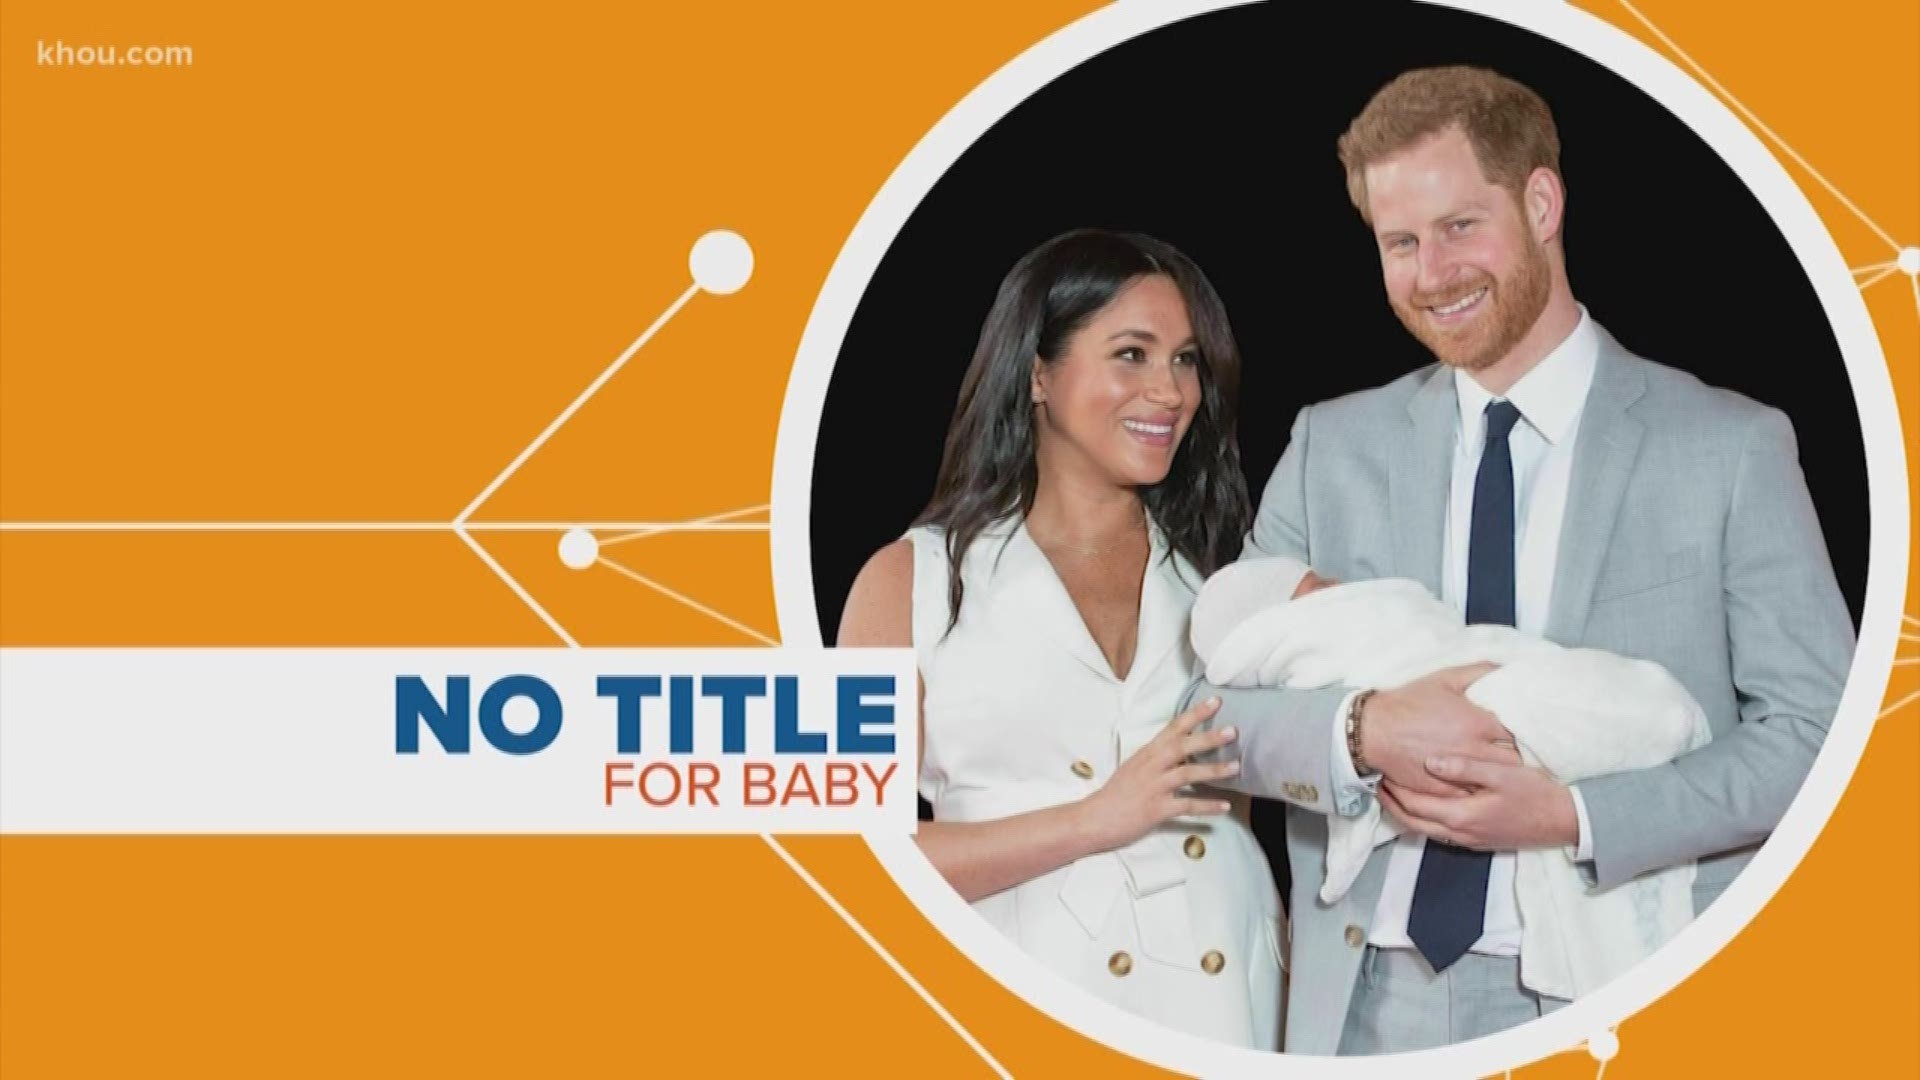 We finally know the name of Prince Harry and Meghan’s baby boy. And a lot of people are excited they decided to break from royal tradition. Our Janelle Bludau connects the dots.